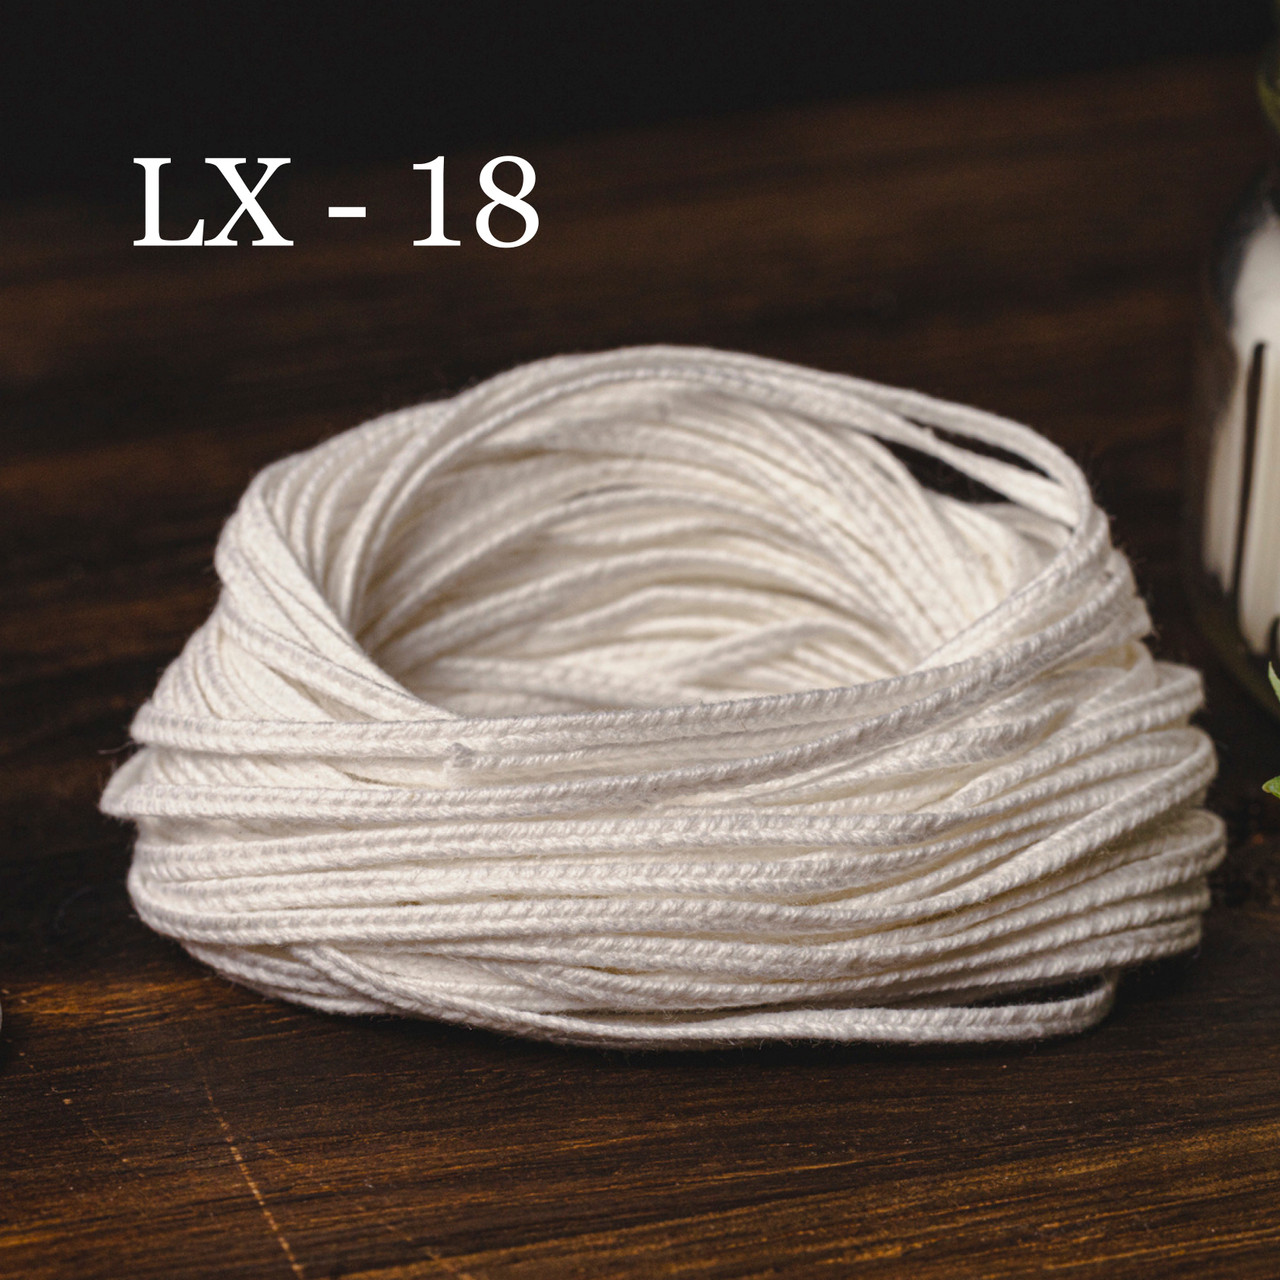 8” - 25pcs unbleached pre-tabbed organic cotton cored wicks for prayer  candles.